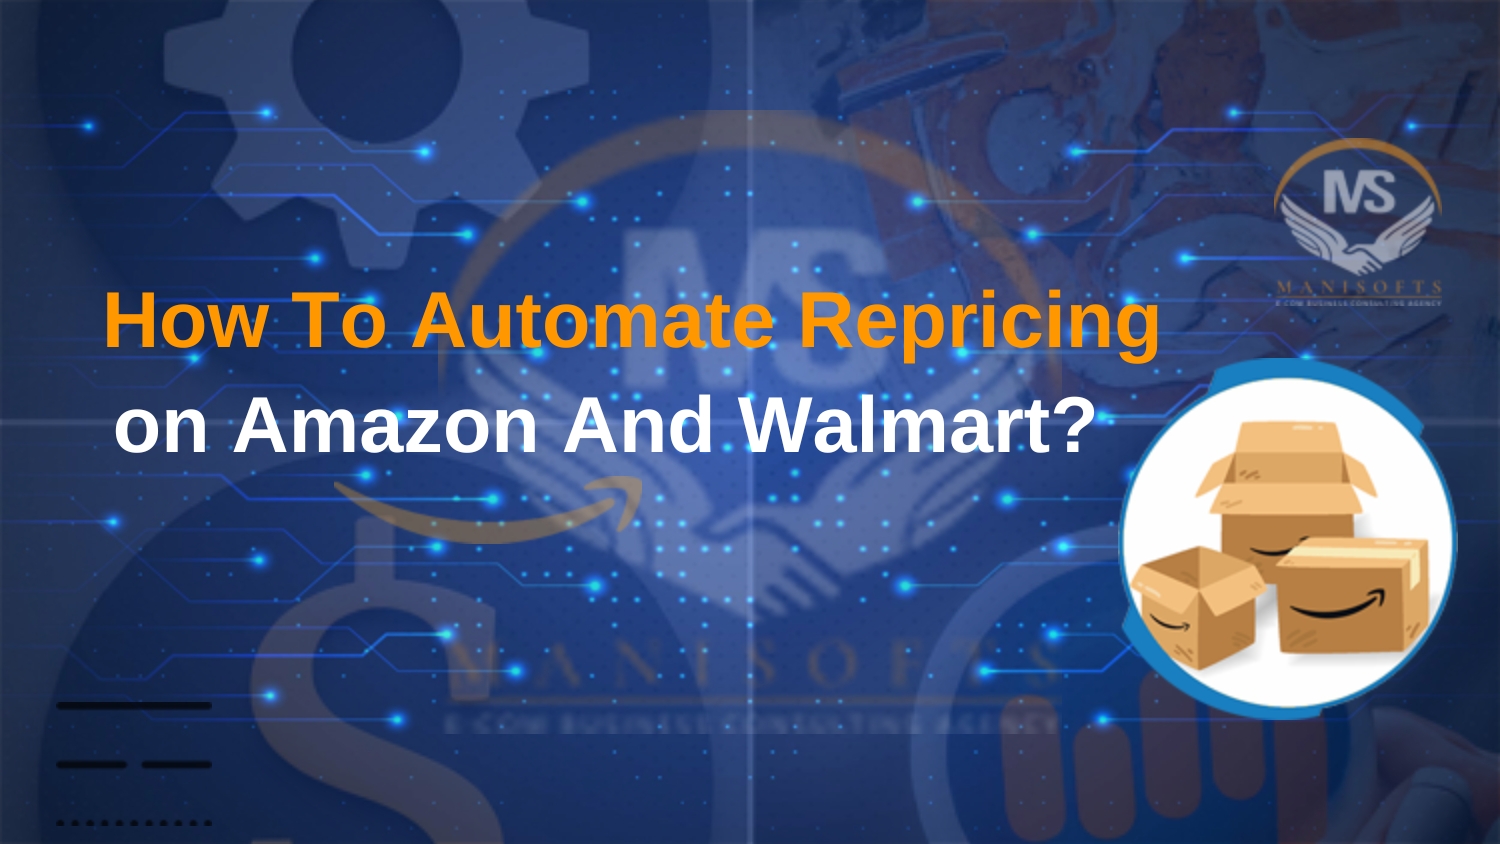 How To Automate Repricing on Amazon And Walmart